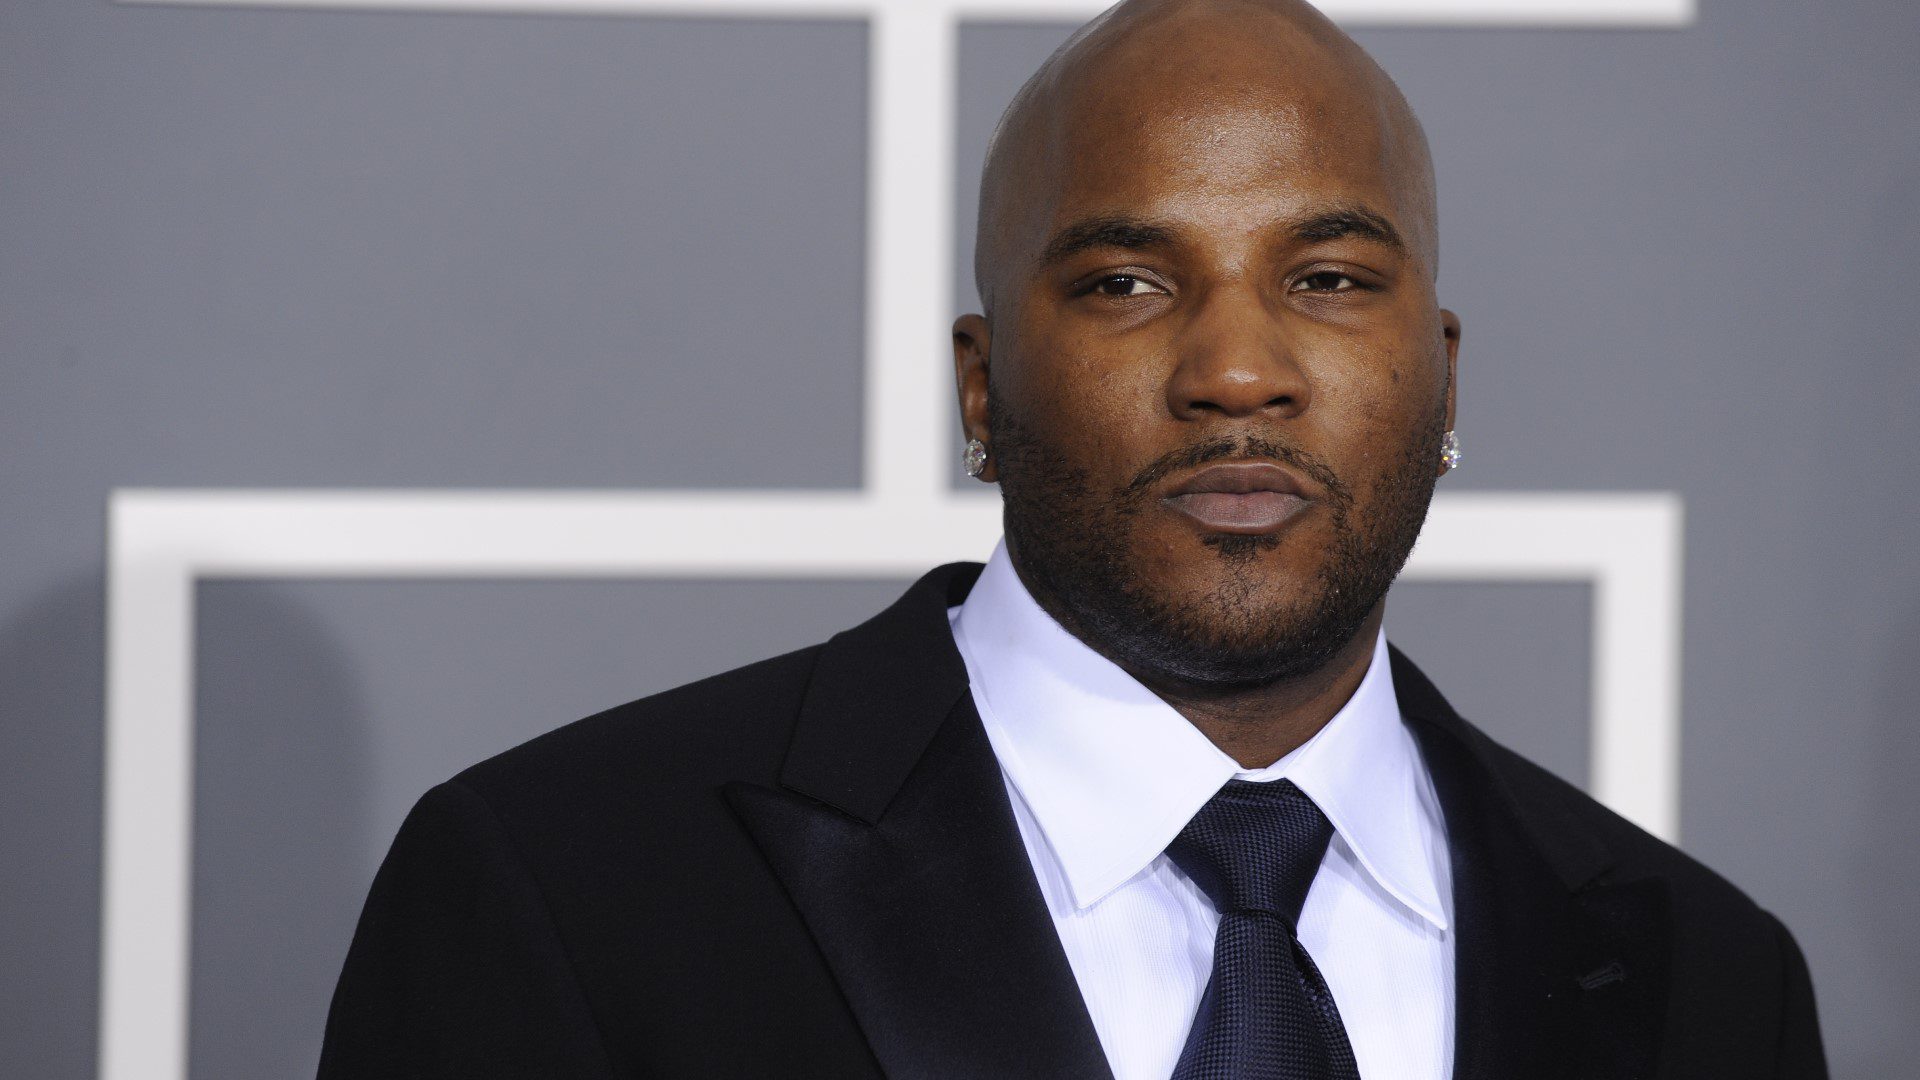 What Is Jeezy's Net Worth?